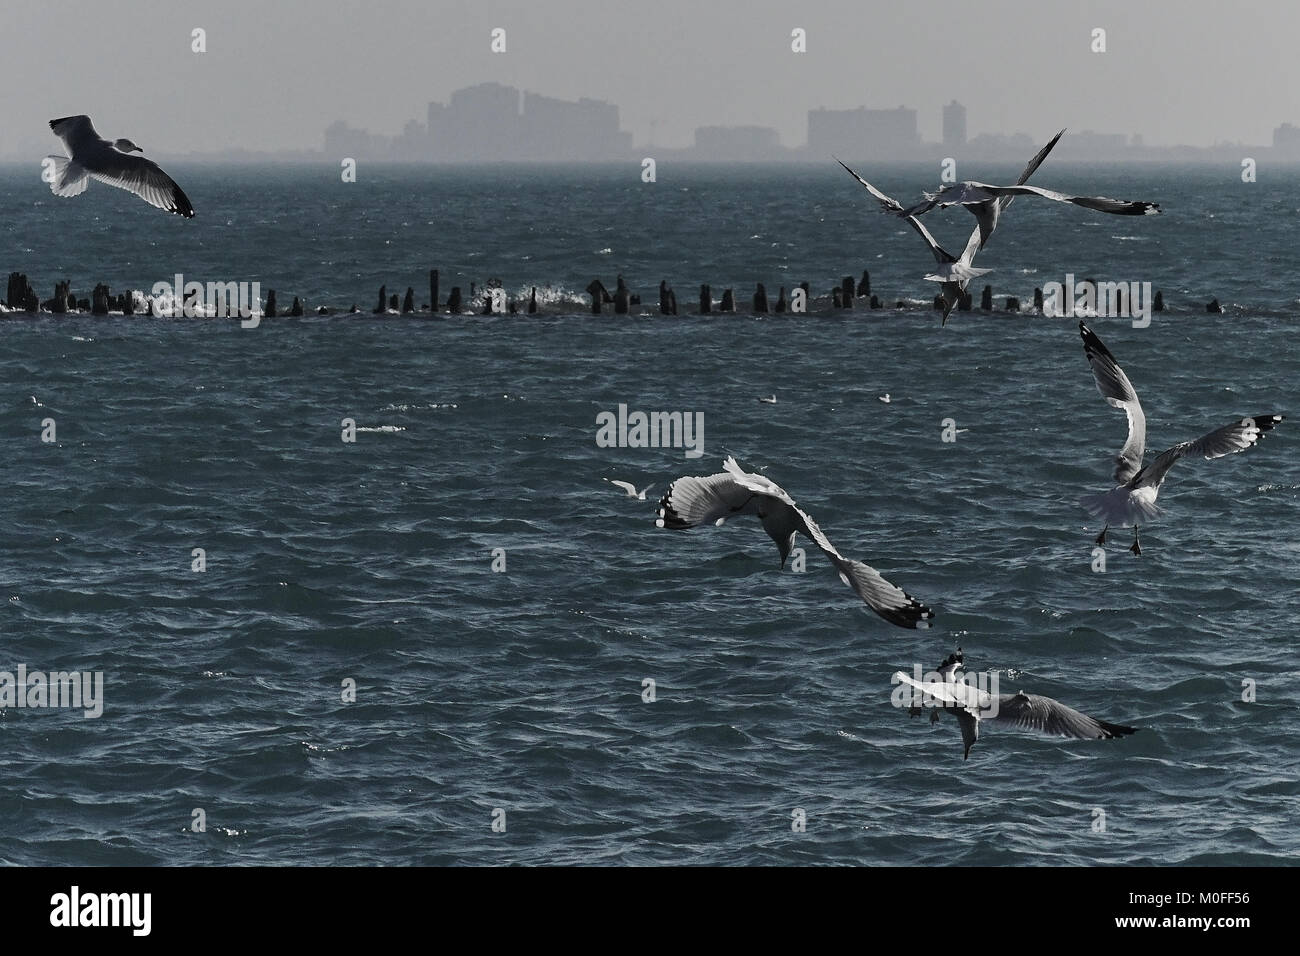 Small group of gulls hovering over stormy Lake Michigan with city silhouetted in background Stock Photo